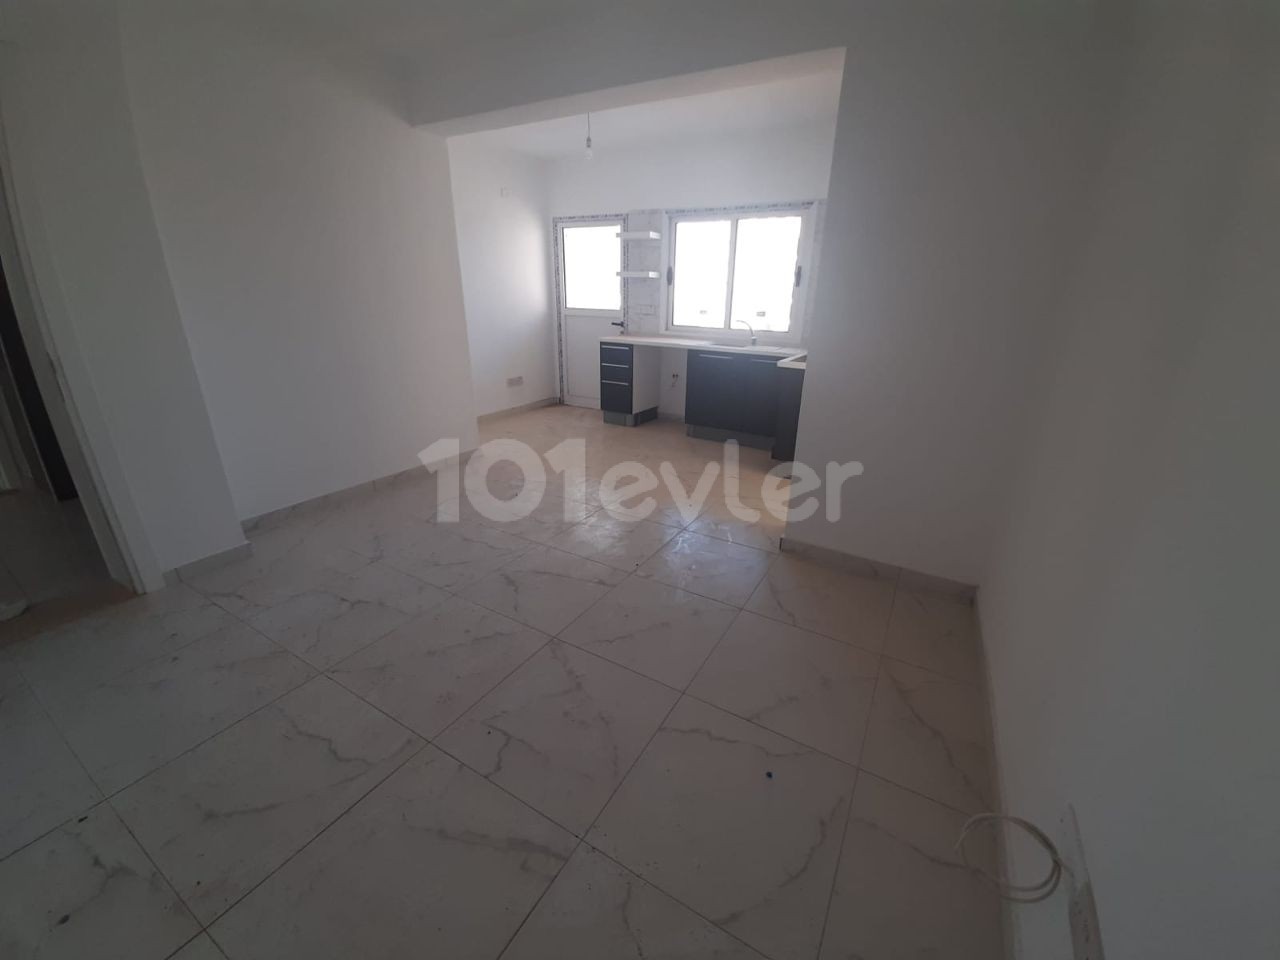 Canakkale 2 + 1 without furniture Floor 3 from 6000 tl 6 rent 1 deposit 1 commission 70 m² There is an elevator there is a car park.  Dues 400 tl x6 2400 tl 05338315976